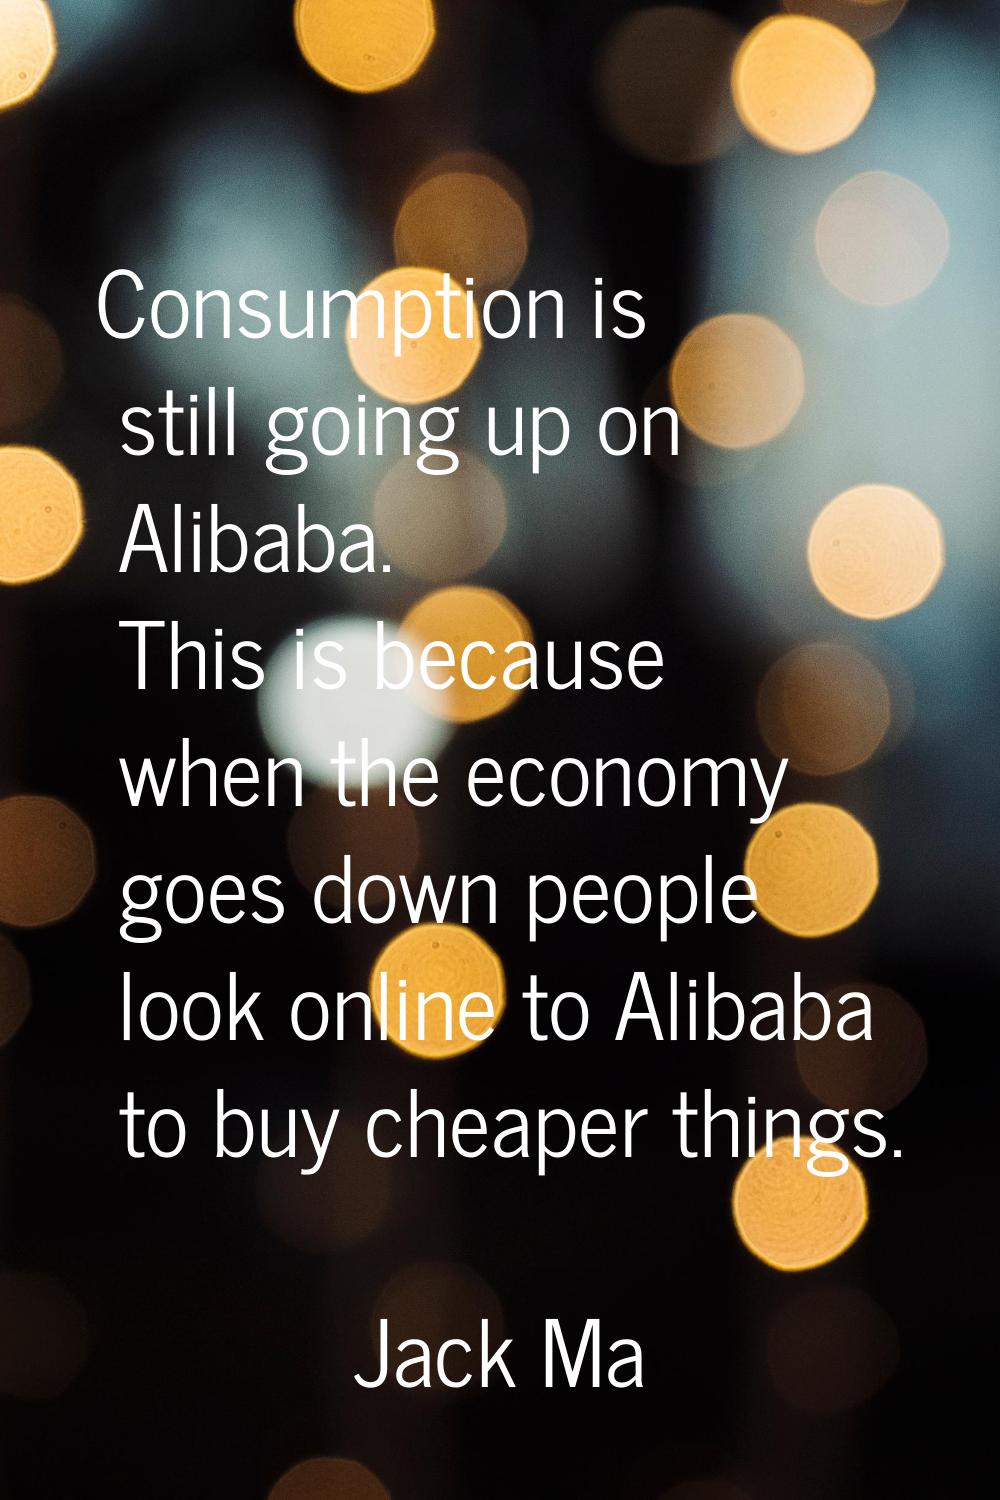 Consumption is still going up on Alibaba. This is because when the economy goes down people look on